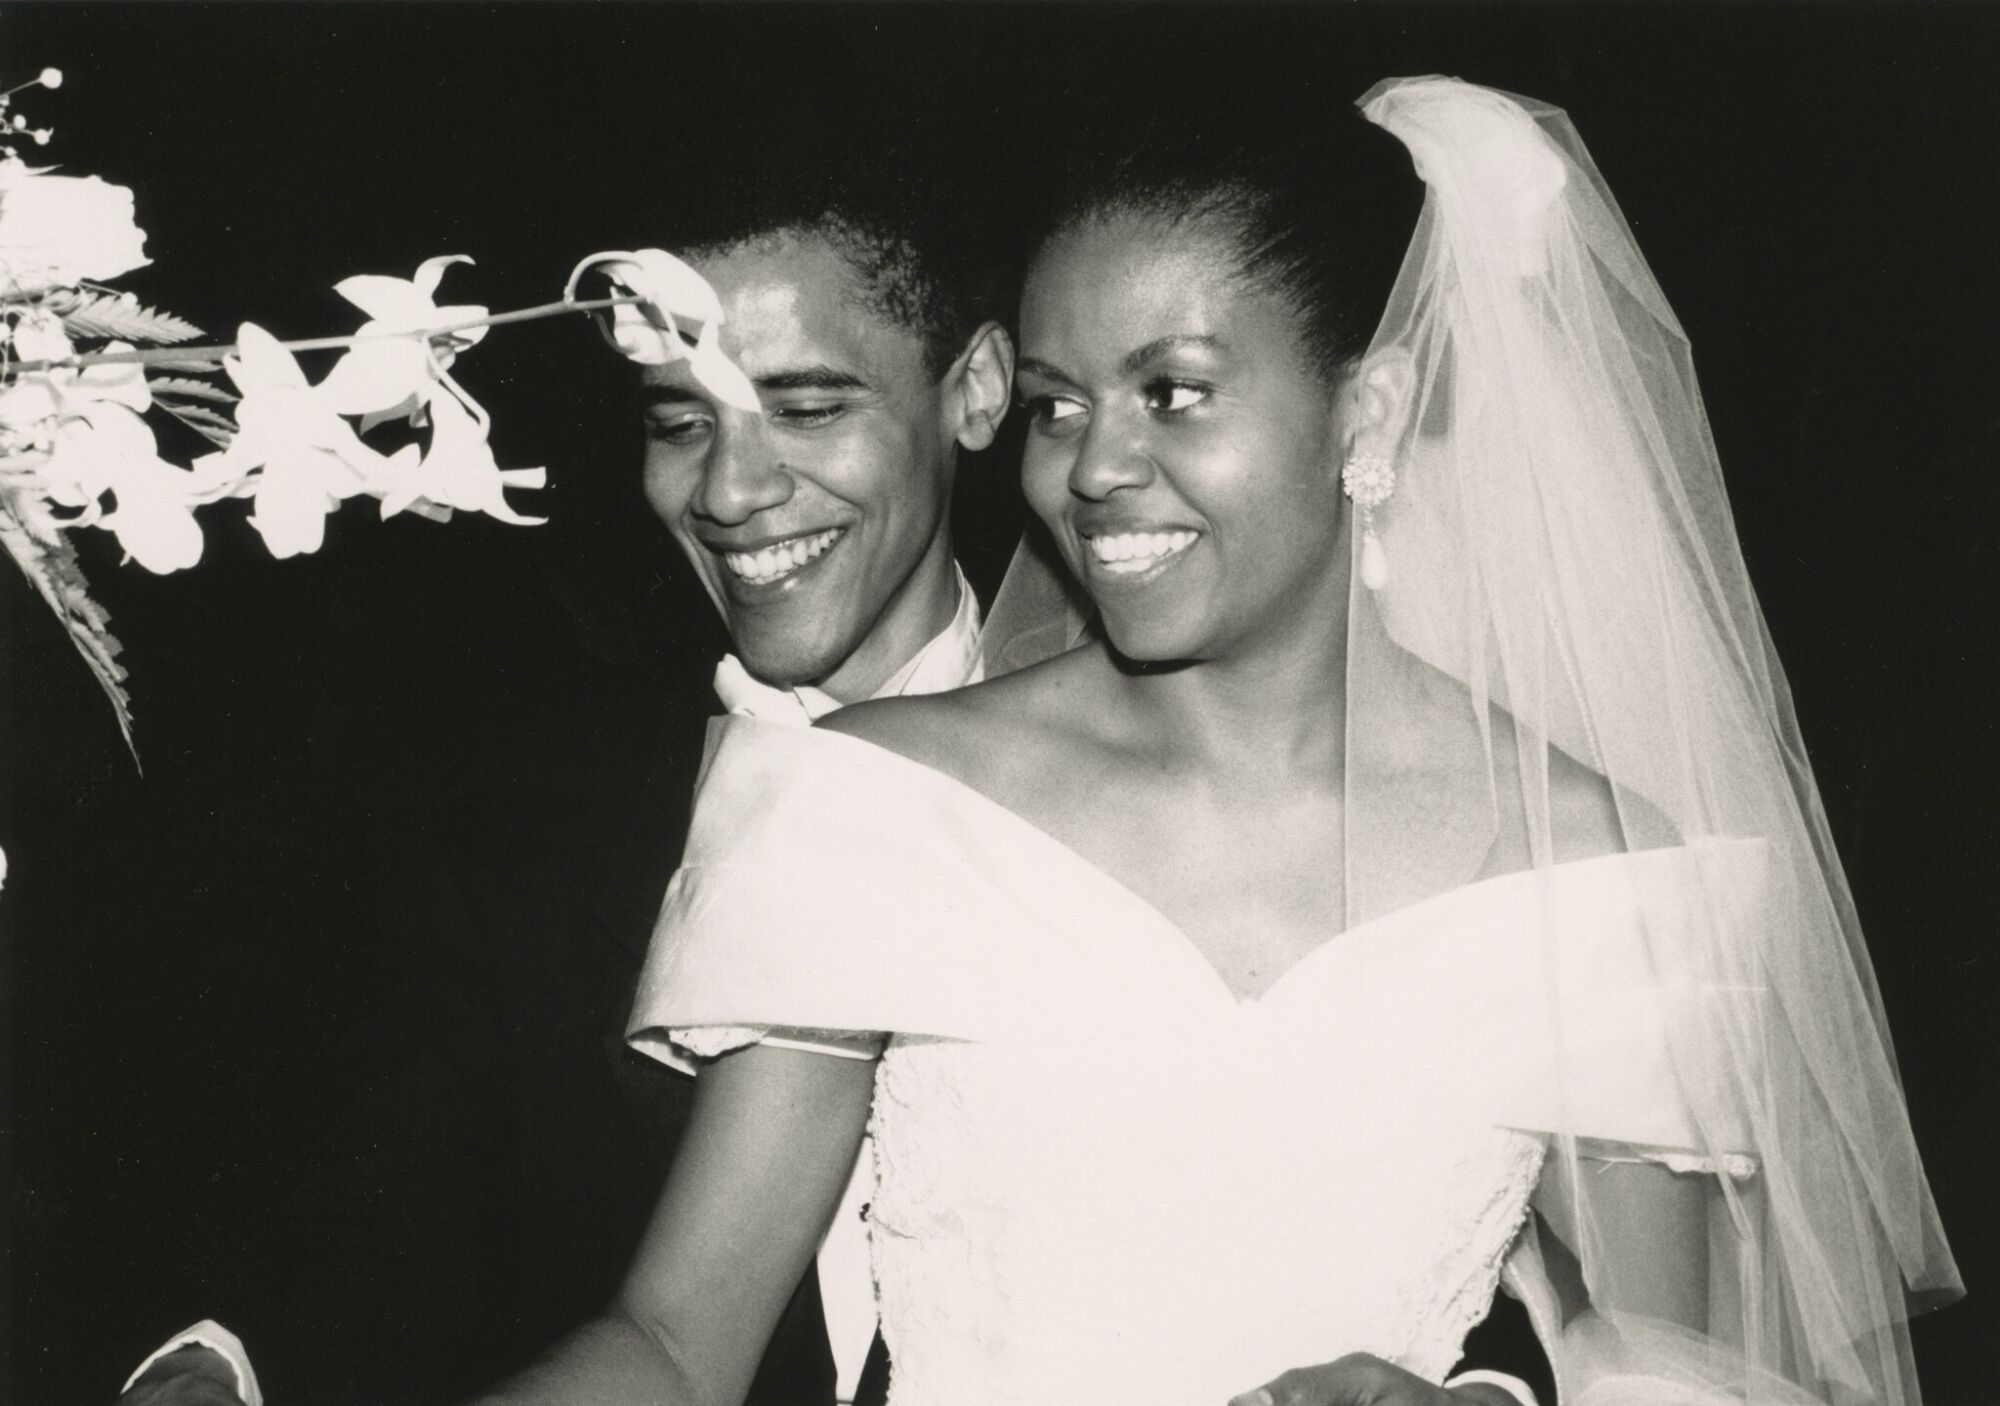 Barack Obama and Michelle Robinson at their wedding reception on Oct. 3, 1992